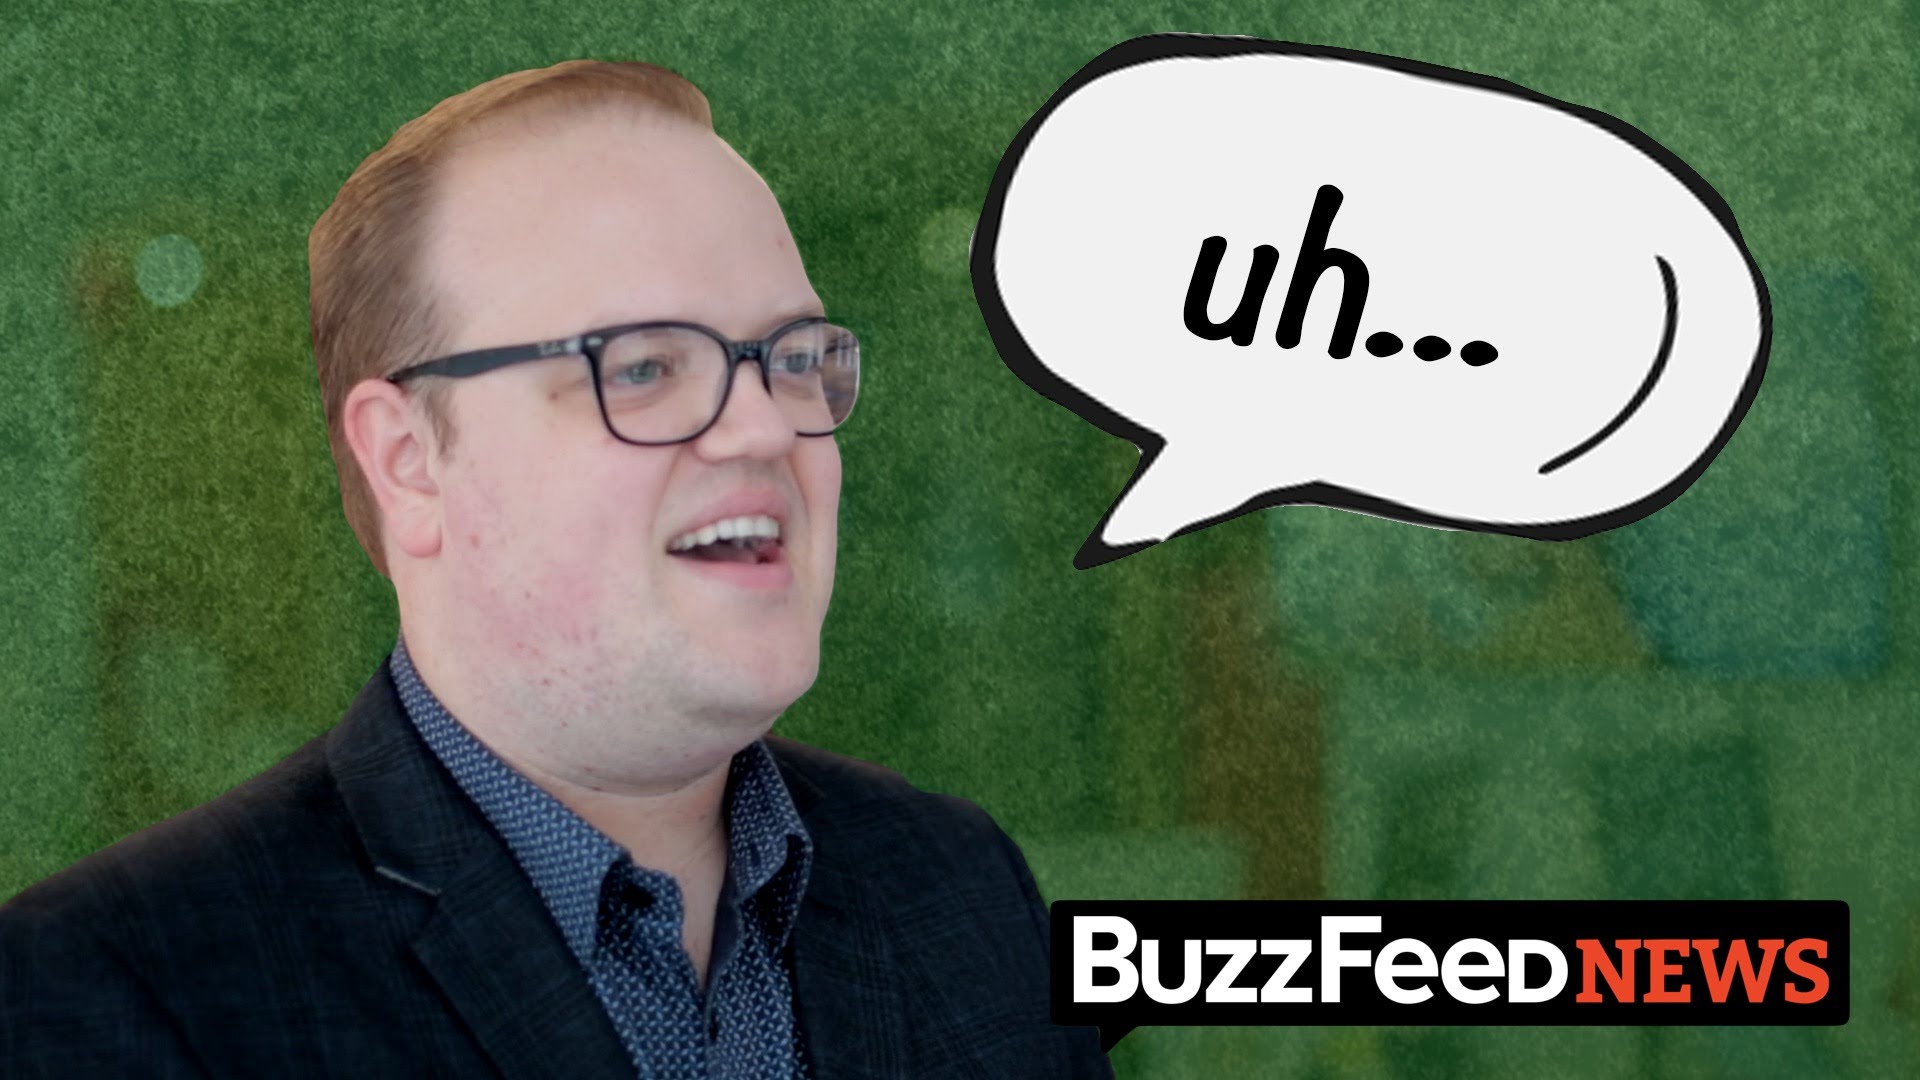 Image: Why I left BuzzFeed: Former employees speak out against media company and fake news outlet